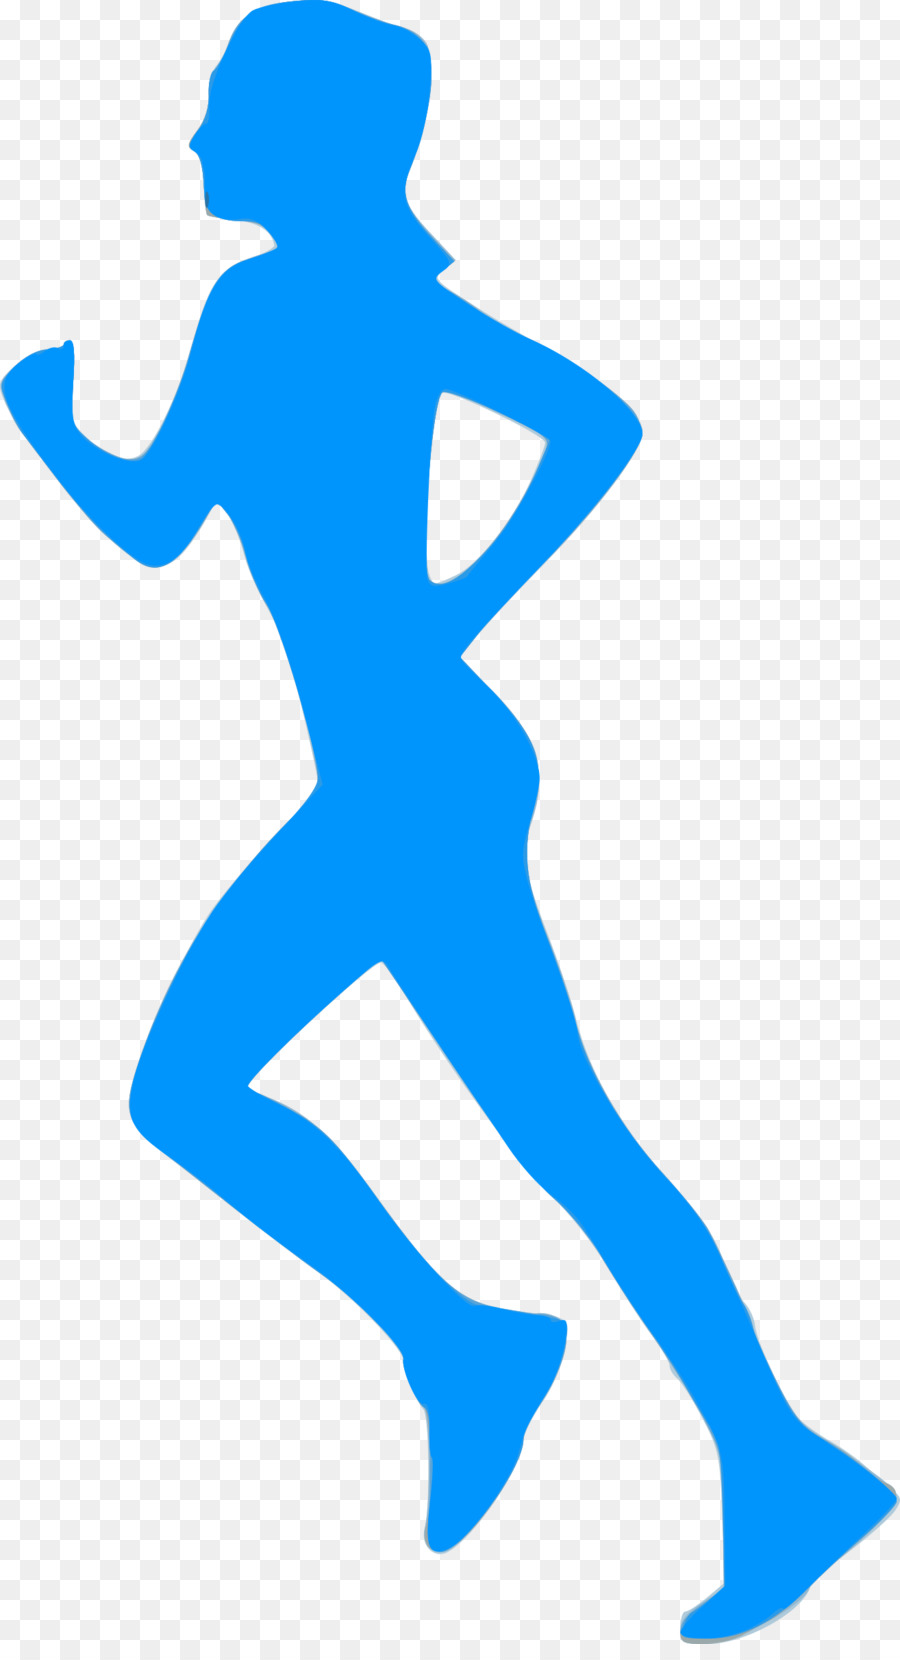 Sports Stoneham Run for Recovery 5K Clip art Cross country running - extreme sports silhouettes png download - 1314*2400 - Free Transparent Sports png Download.